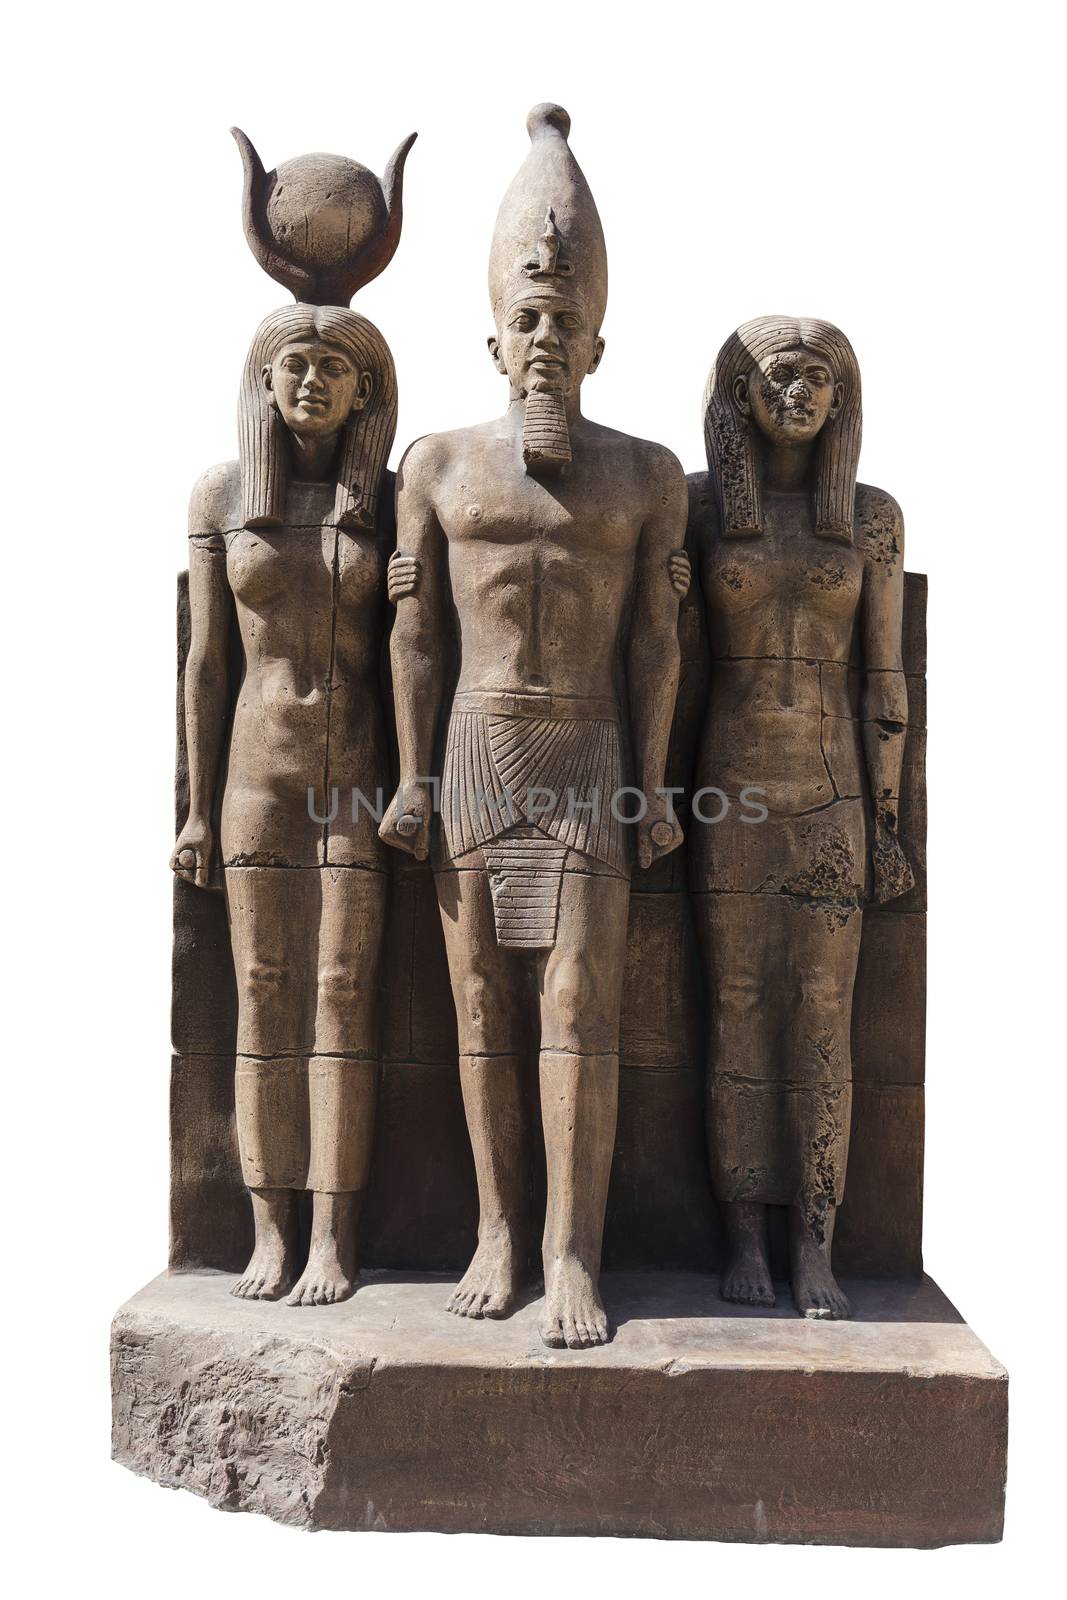 Egyptian sculpture of stone on white isolated background